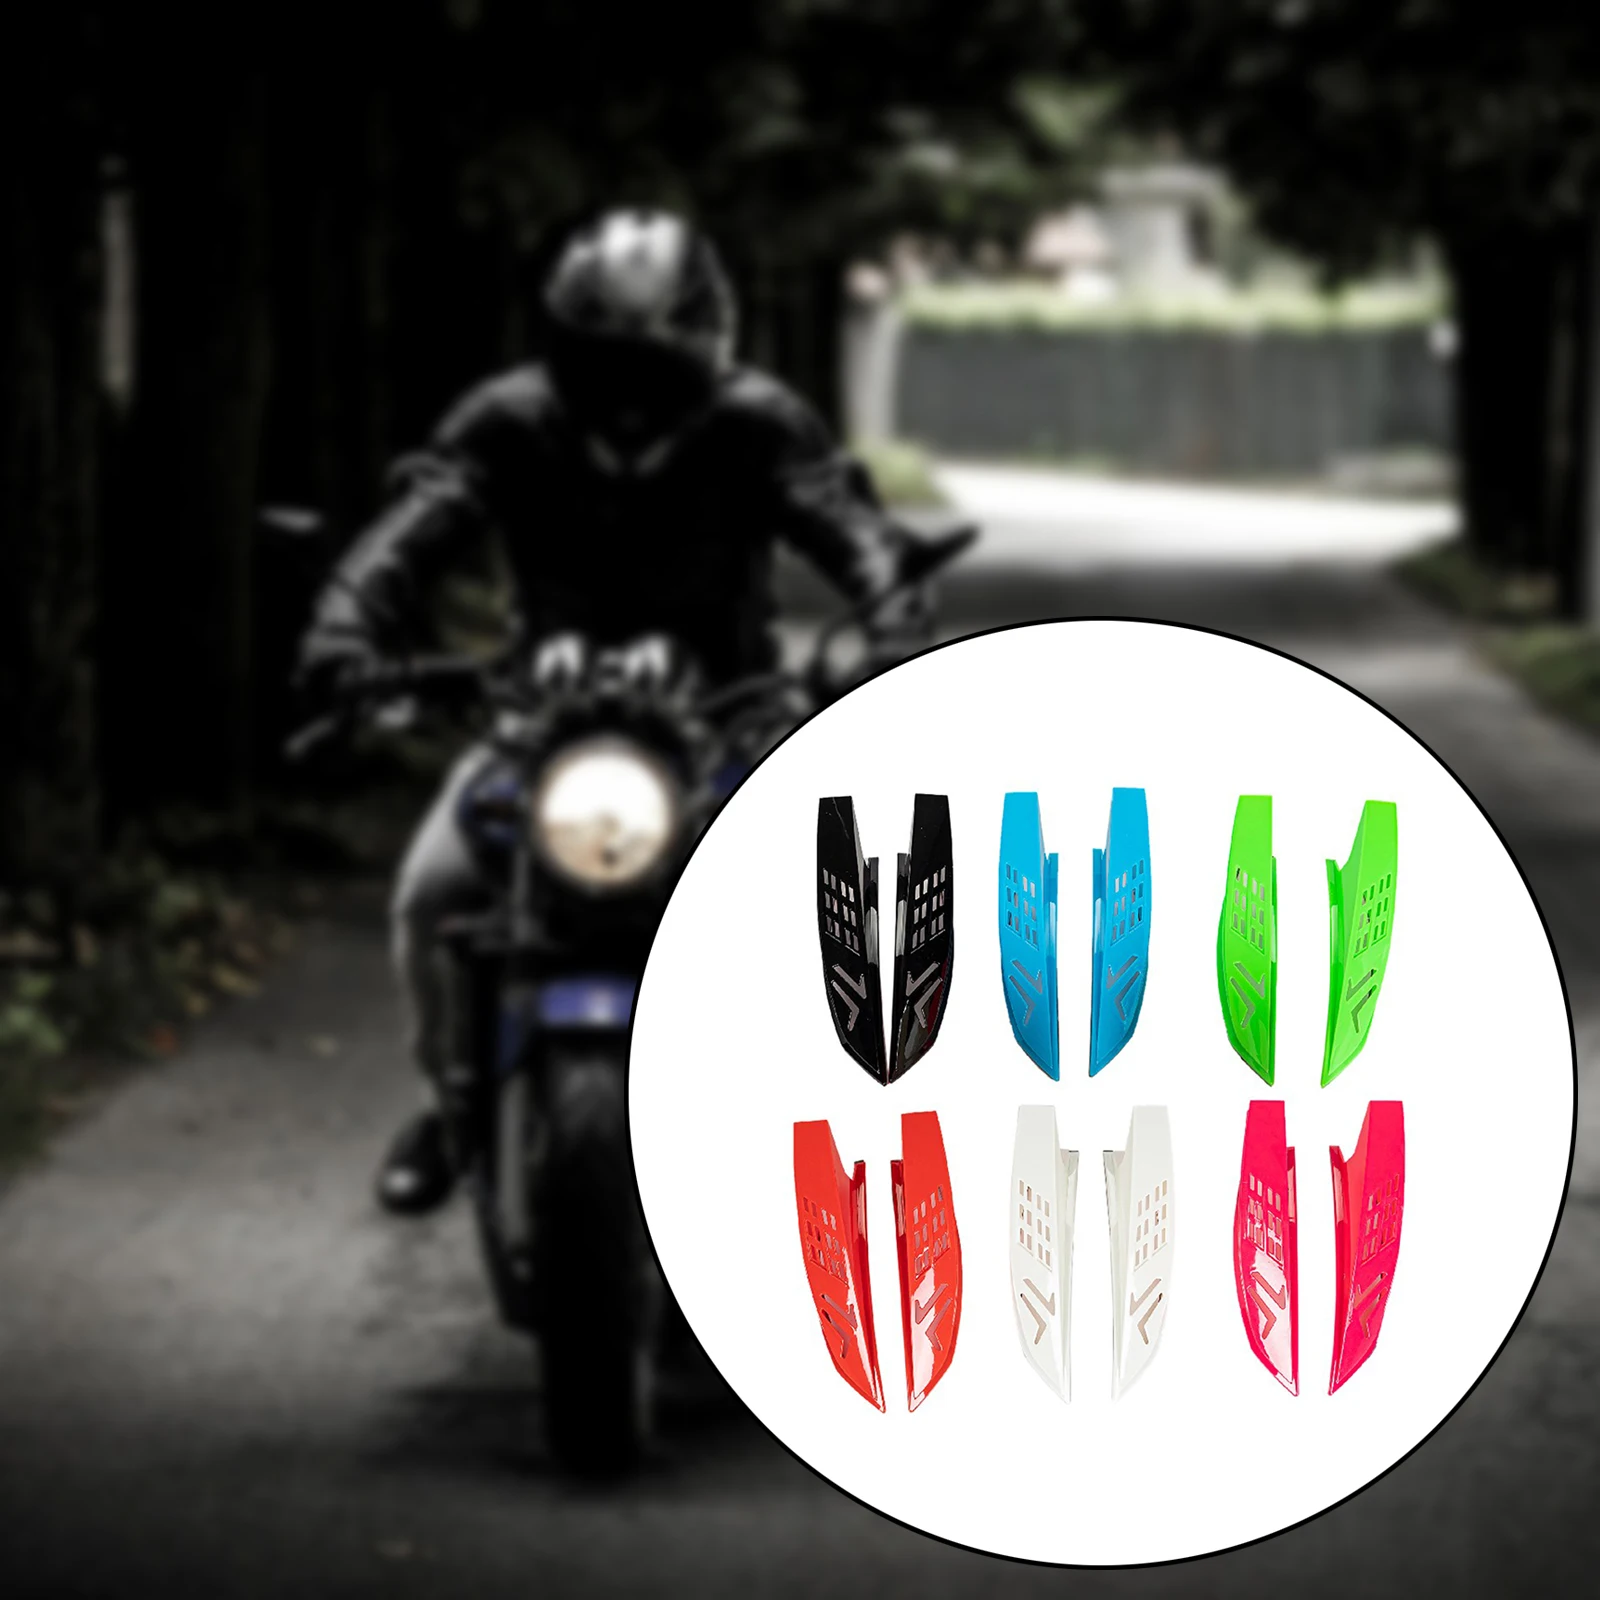 Plastic Helmet Ears Horns Punk Protective Decorative Stylish Motorbike Accessories Strong Adhesive Decor Easy to Install